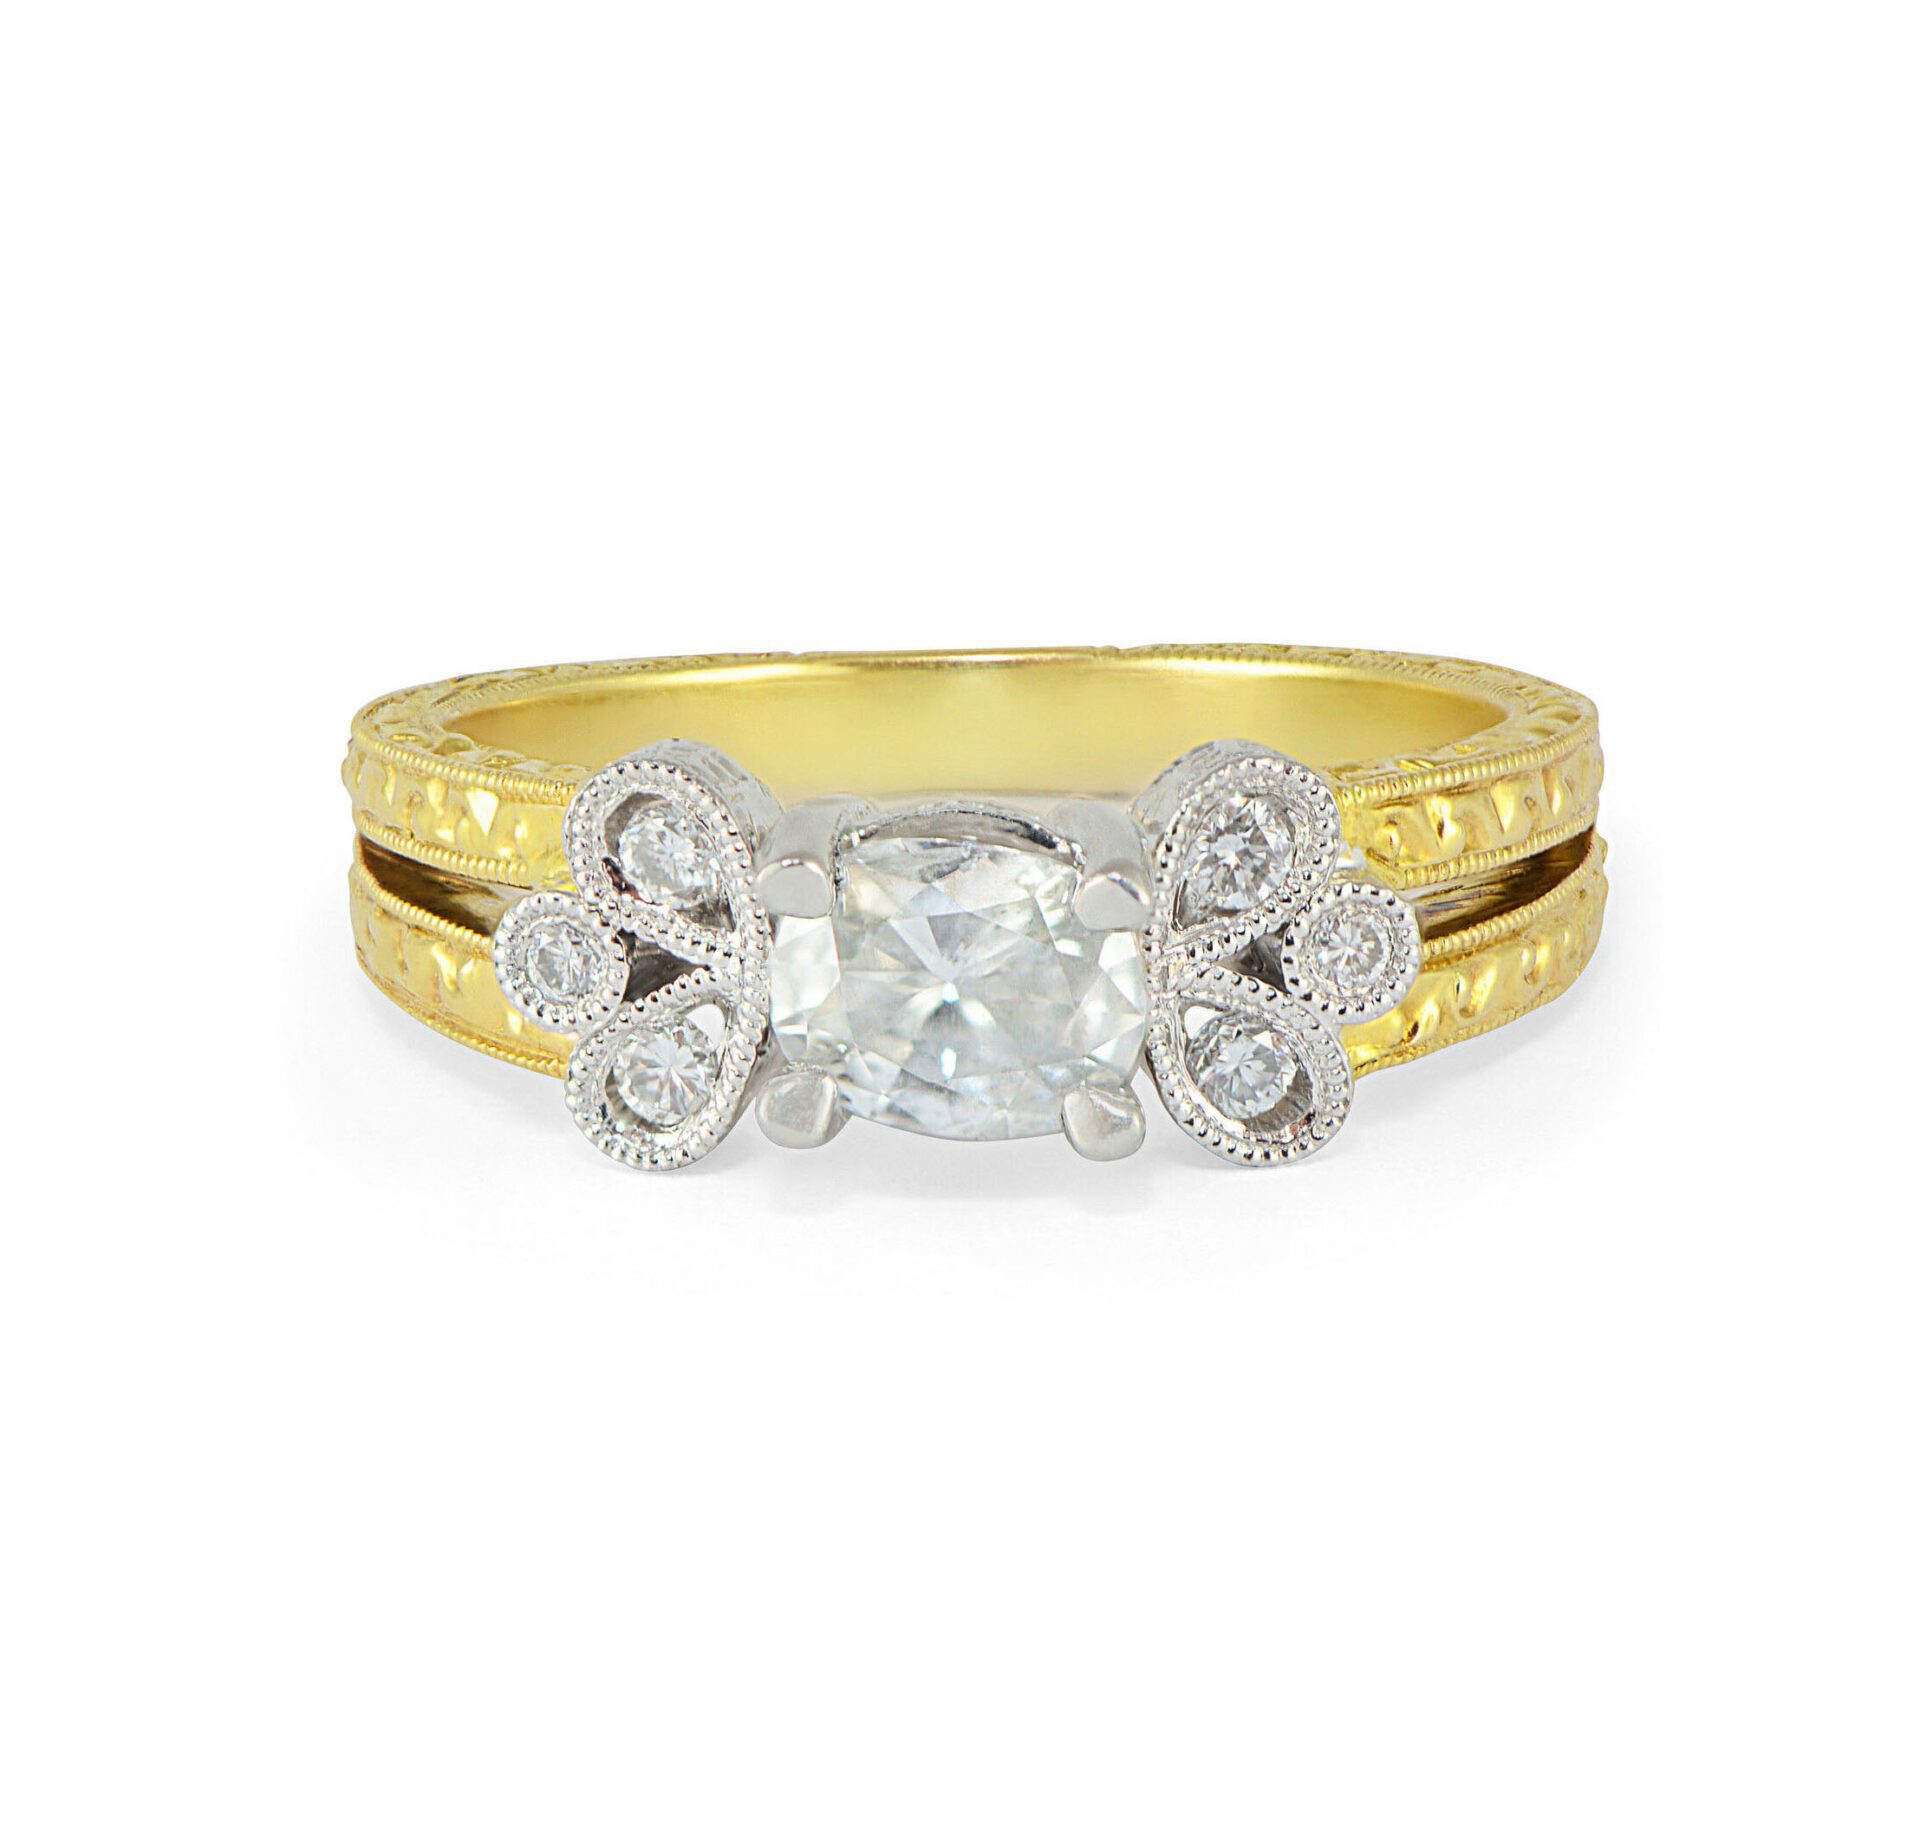 Vintage-Style-Oval-Diamond-Engagement-Ring-18k-Two-Tone-Hand-Engraved-7ct-SZ-6-132237348983